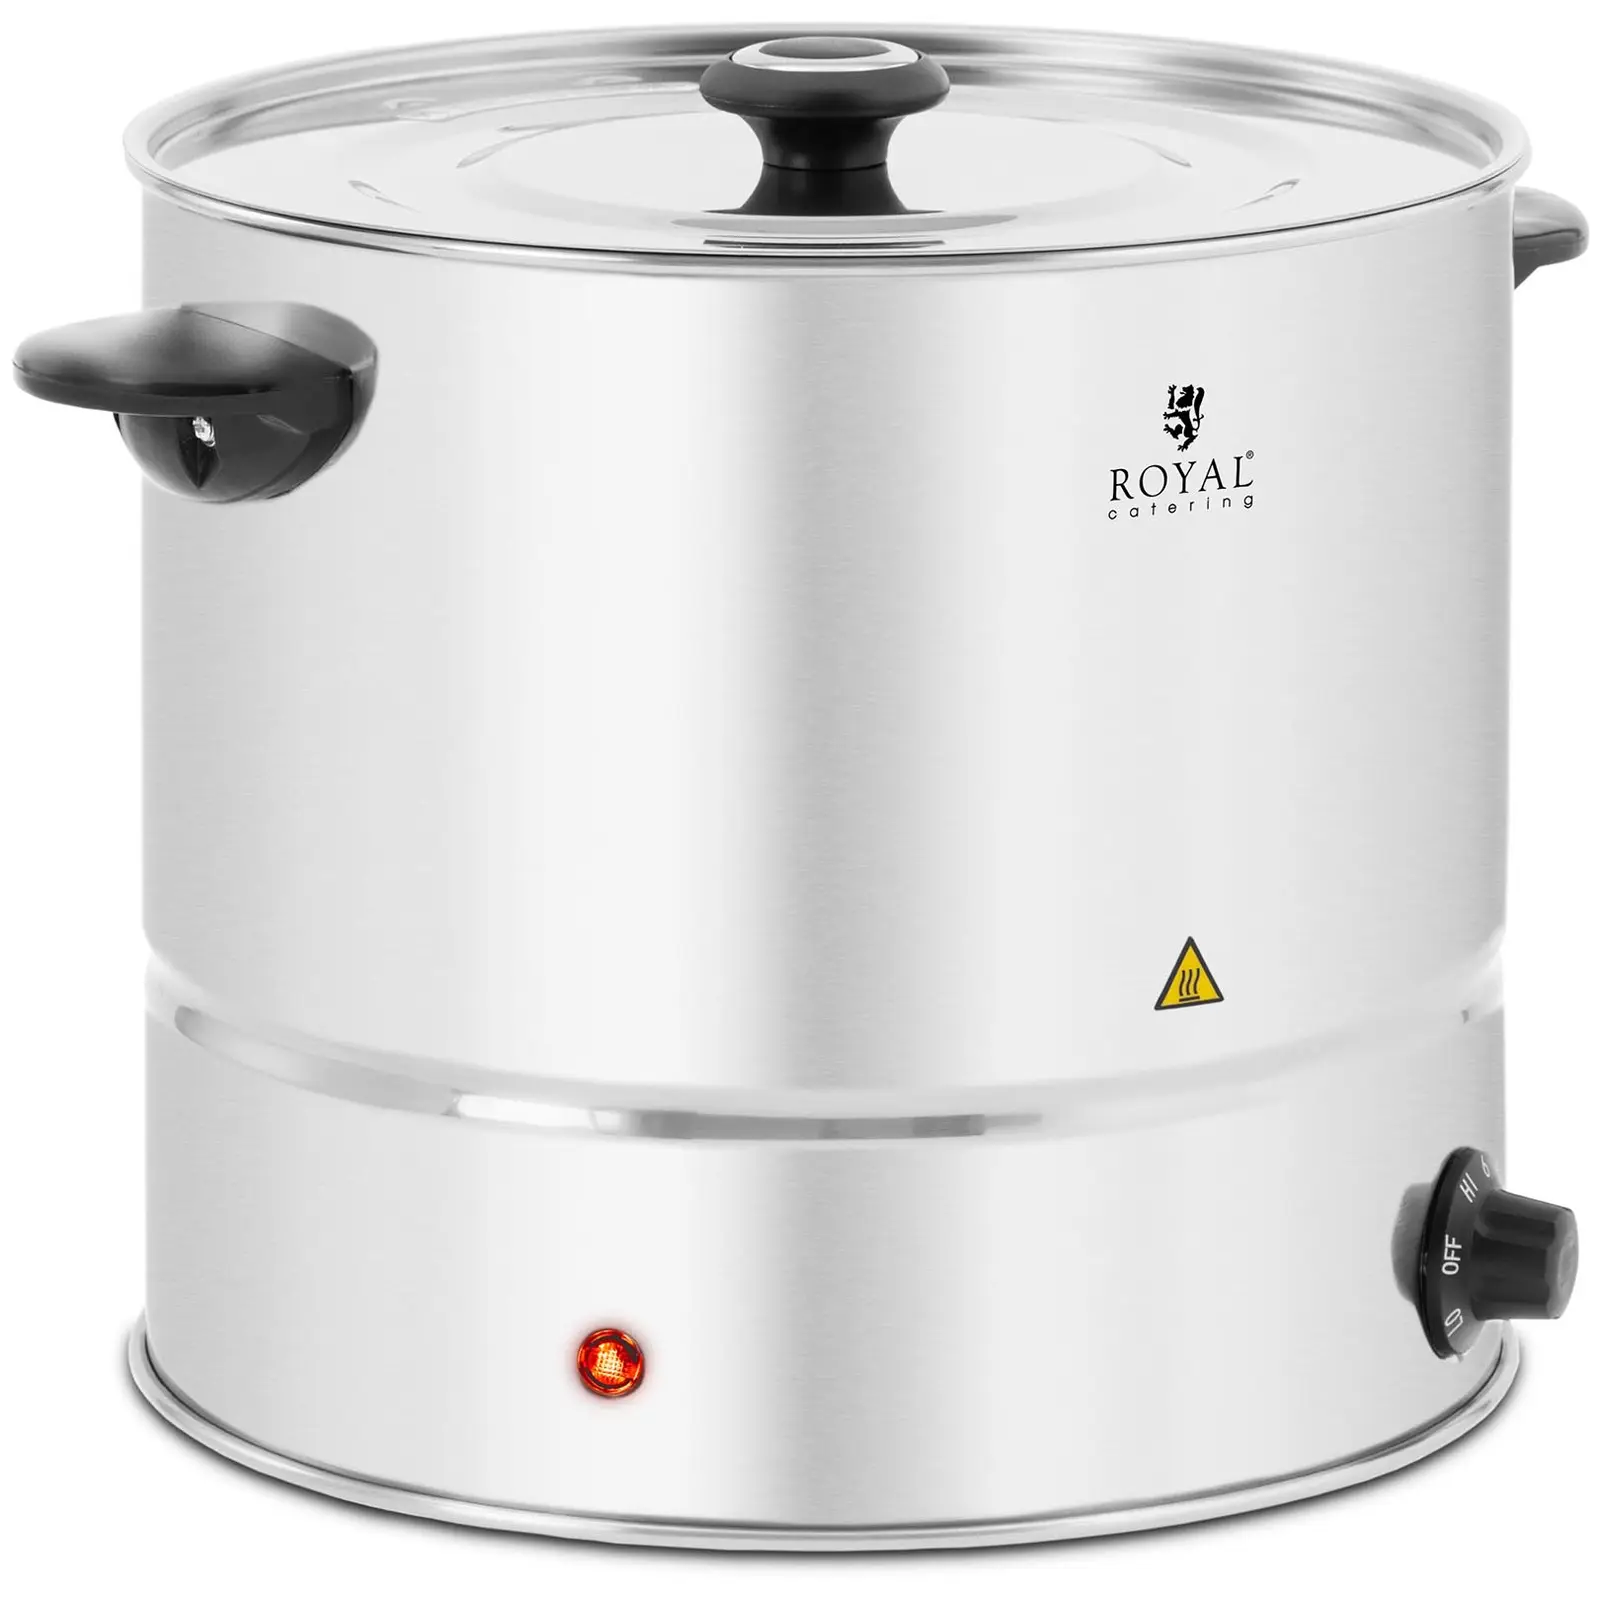 Steamer - 13 L - 1000 W - Royal Catering